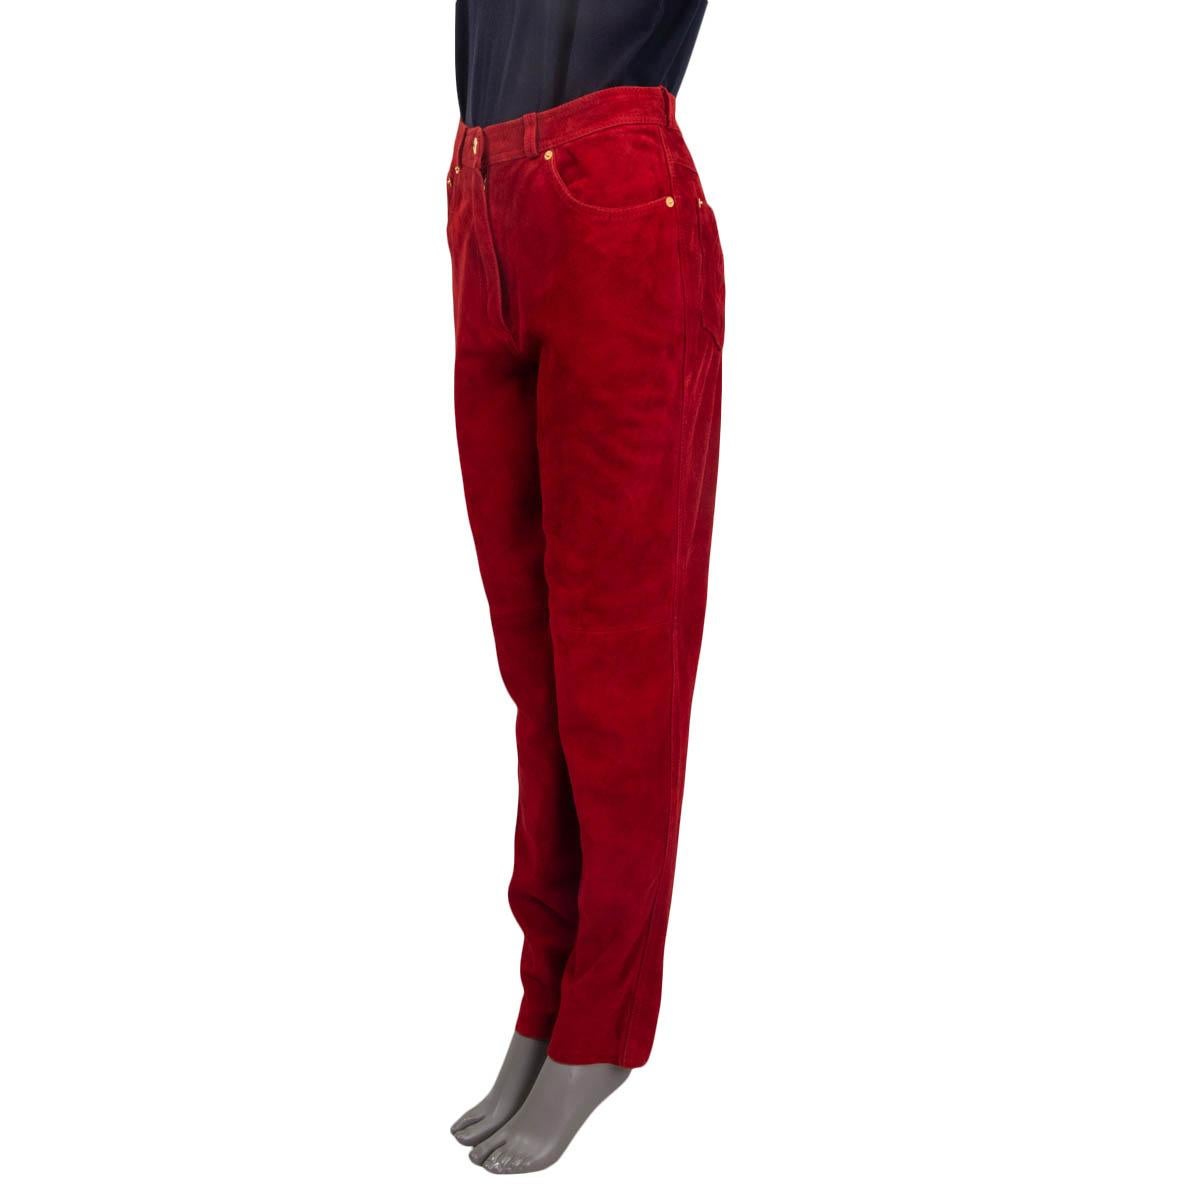 red suede pants